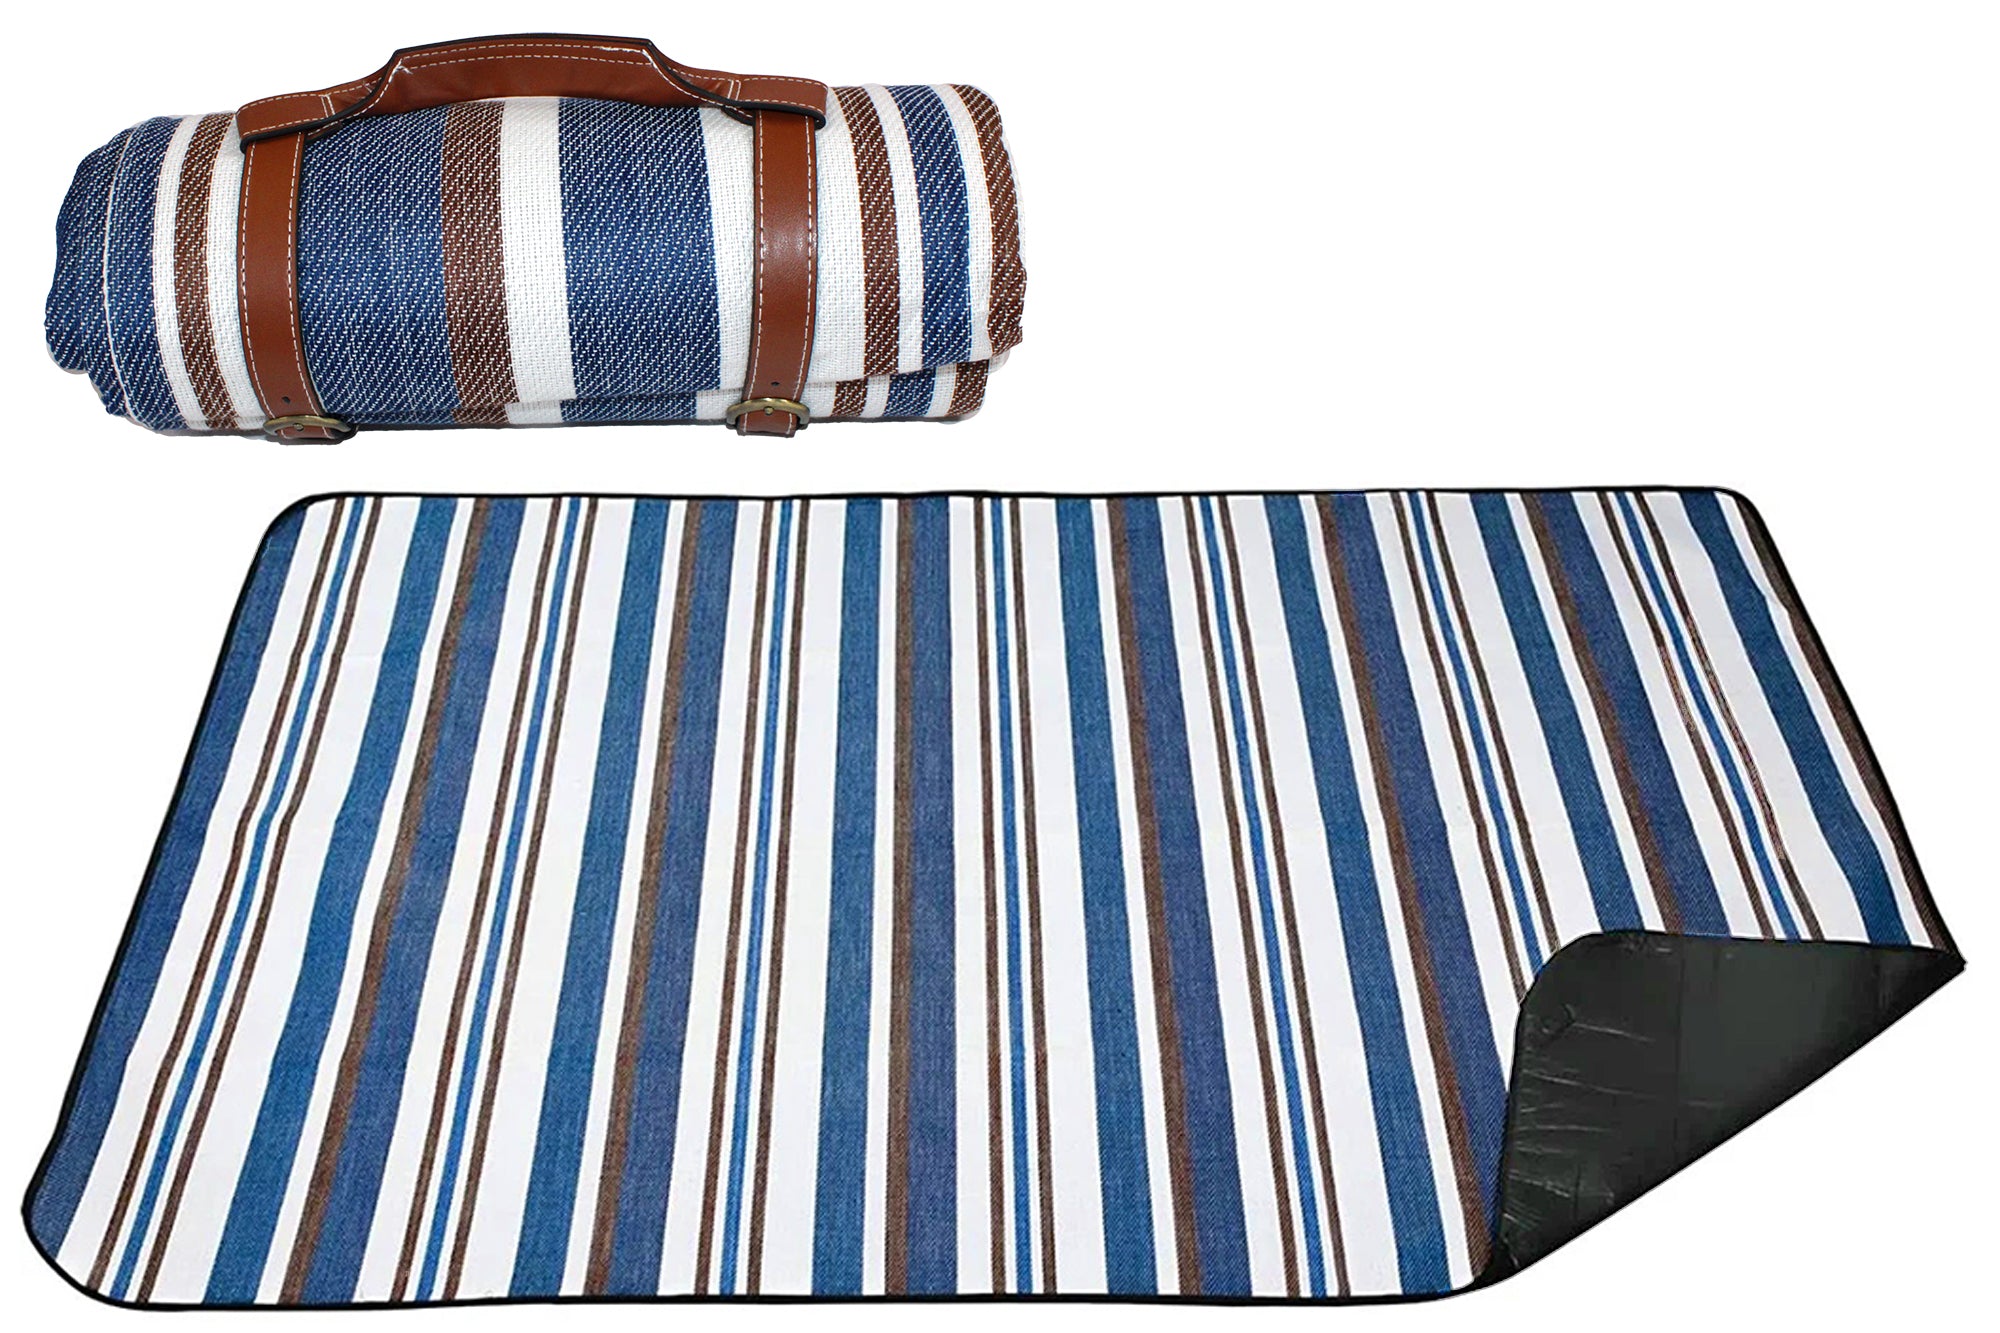 200x150cm Picnic Blanket & Camping Mat with Waterproof Under & Carry Strap